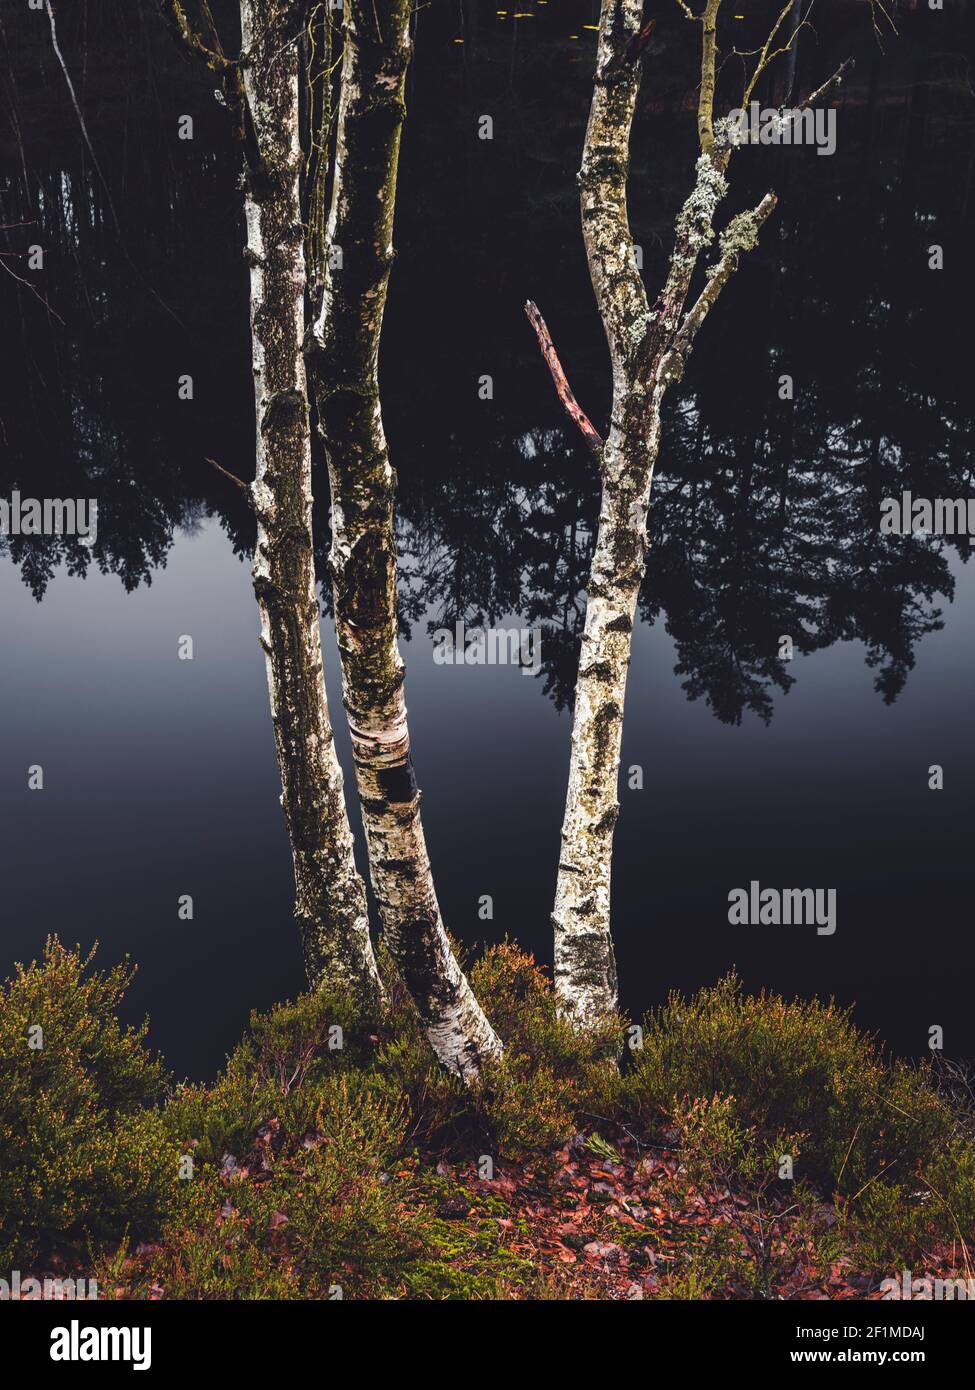 Birch trees at water Stock Photo